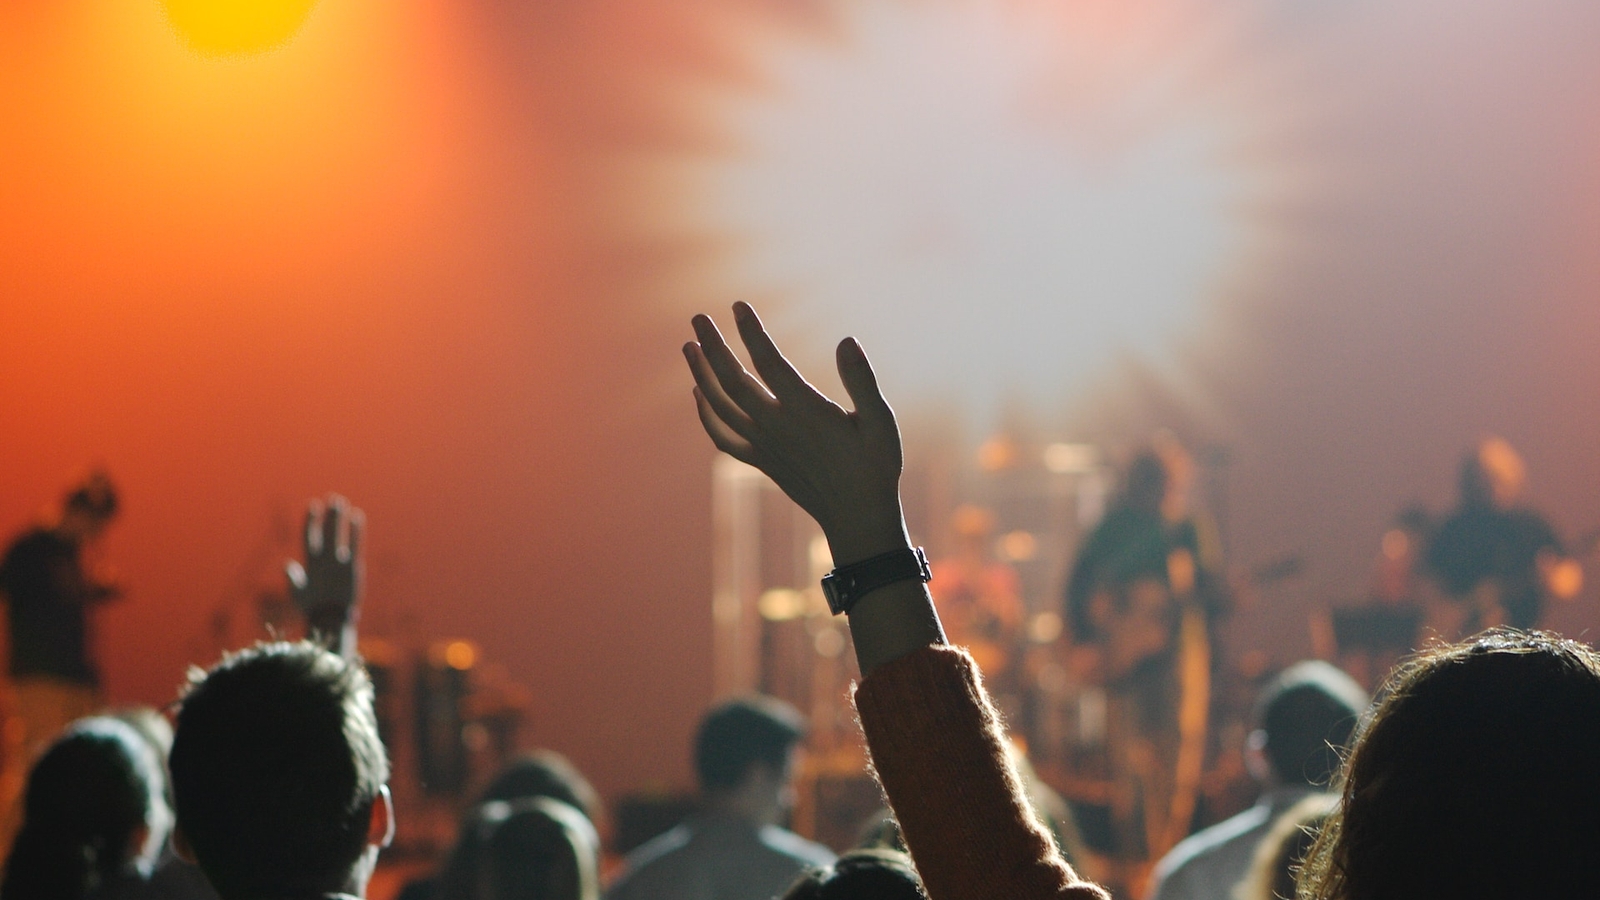 A hand in the air at a music concert